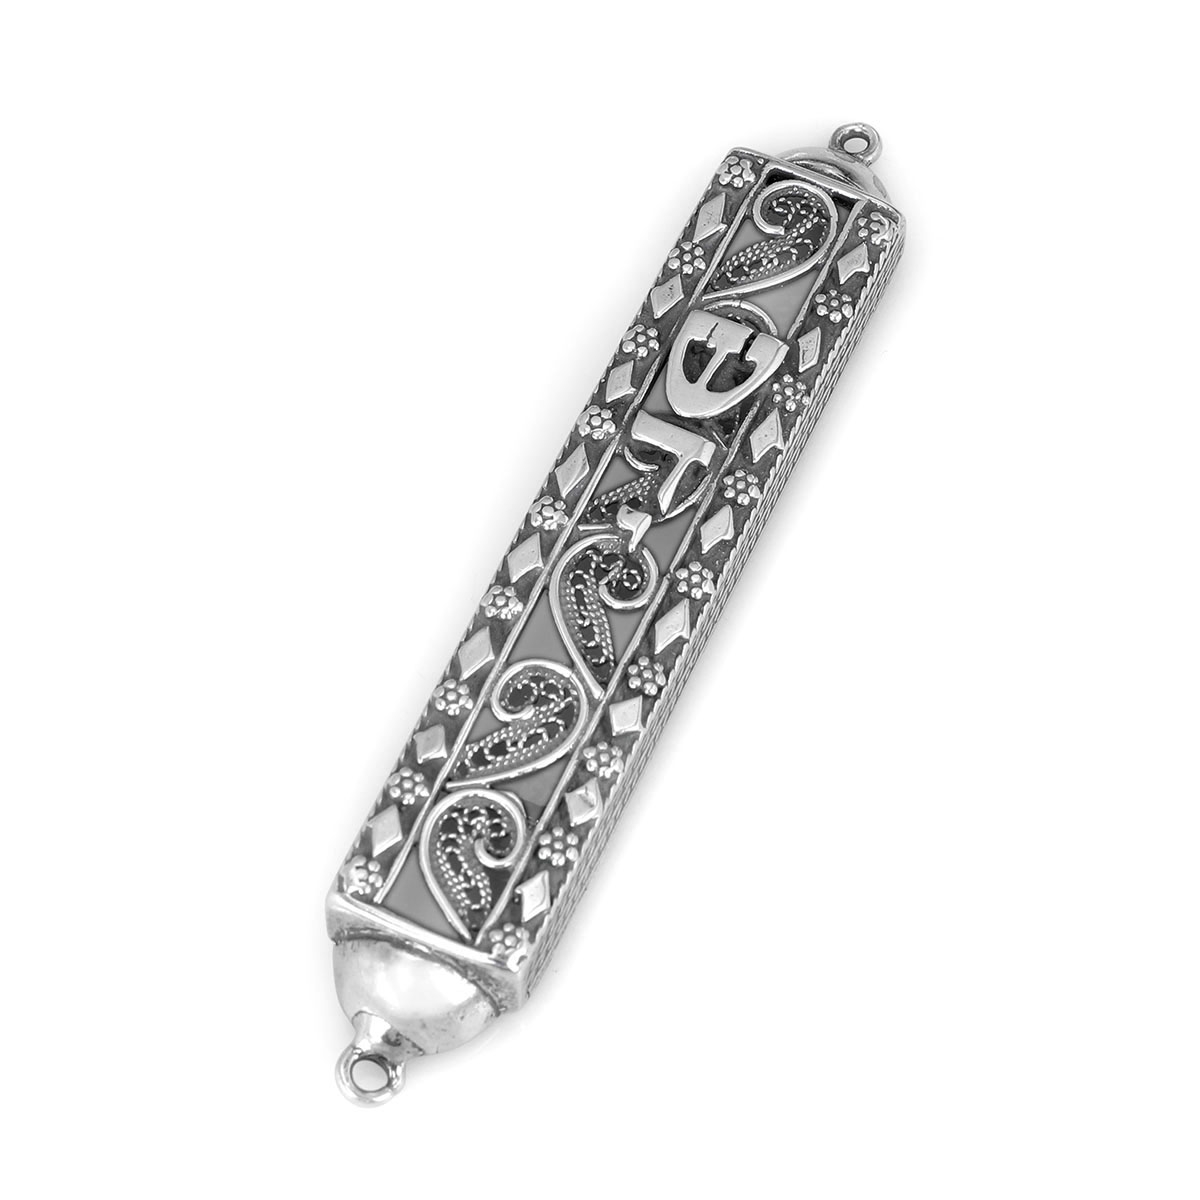 Traditional Yemenite Art Exquisite Handcrafted Sterling Silver Mezuzah Case - 1